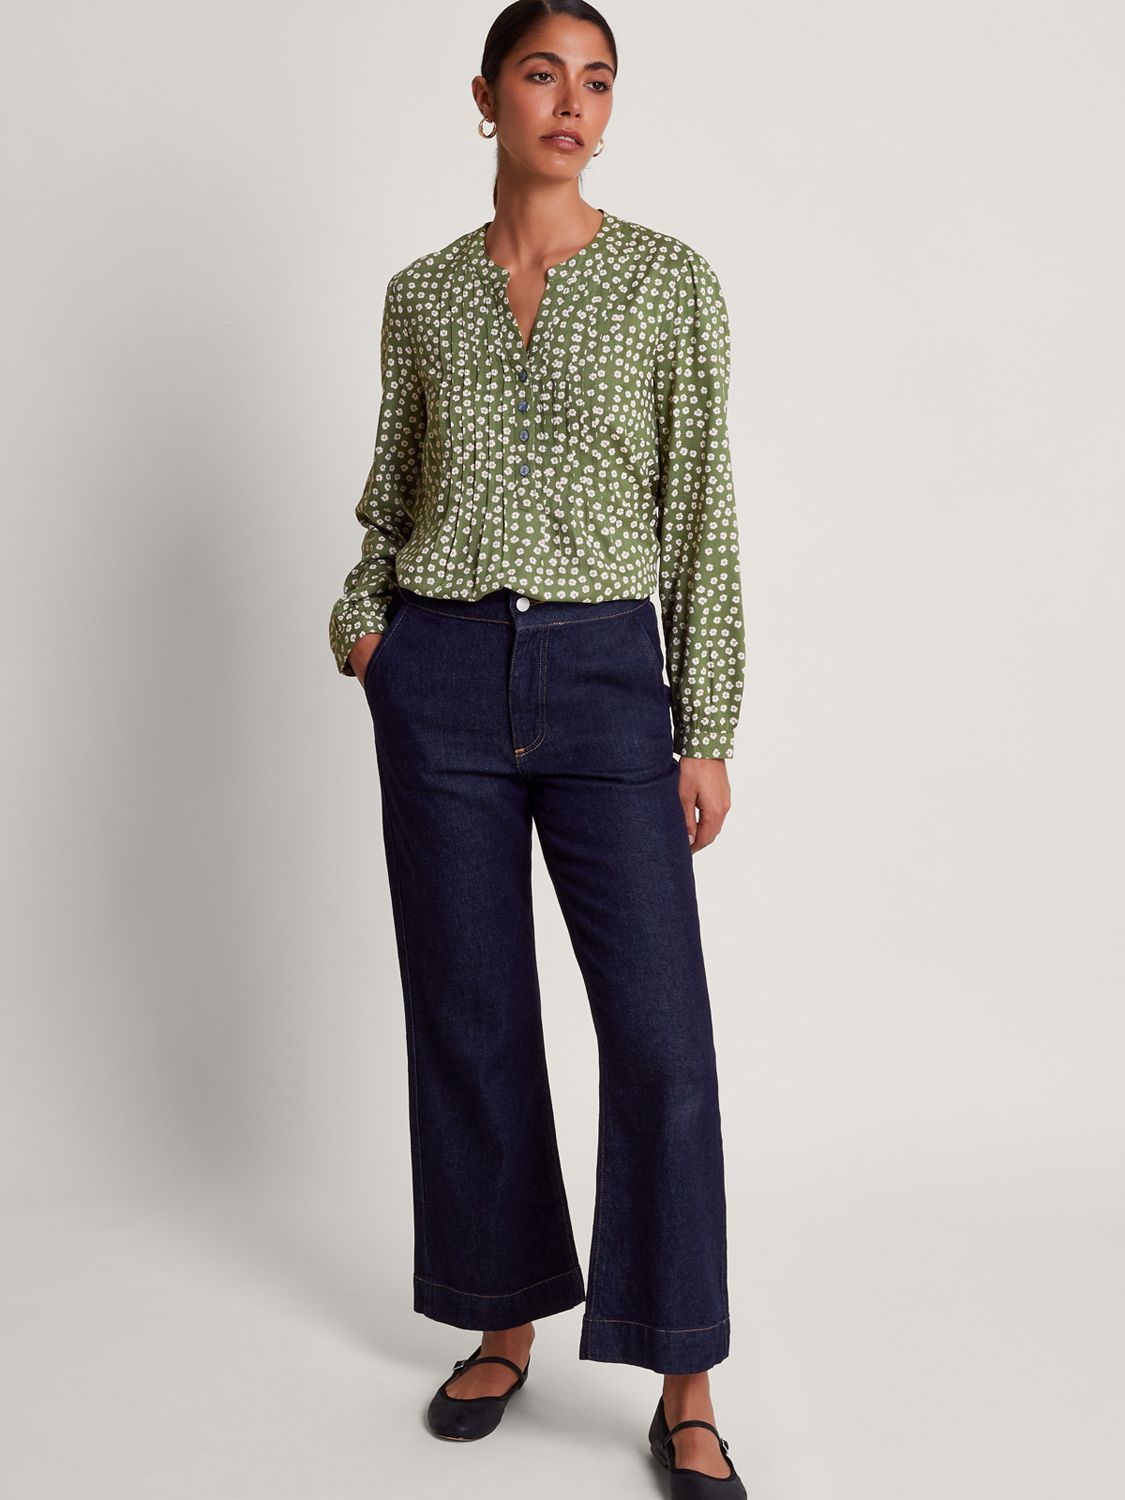 Buy Monsoon Sancha Ditsy Floral Top, Green Online at johnlewis.com